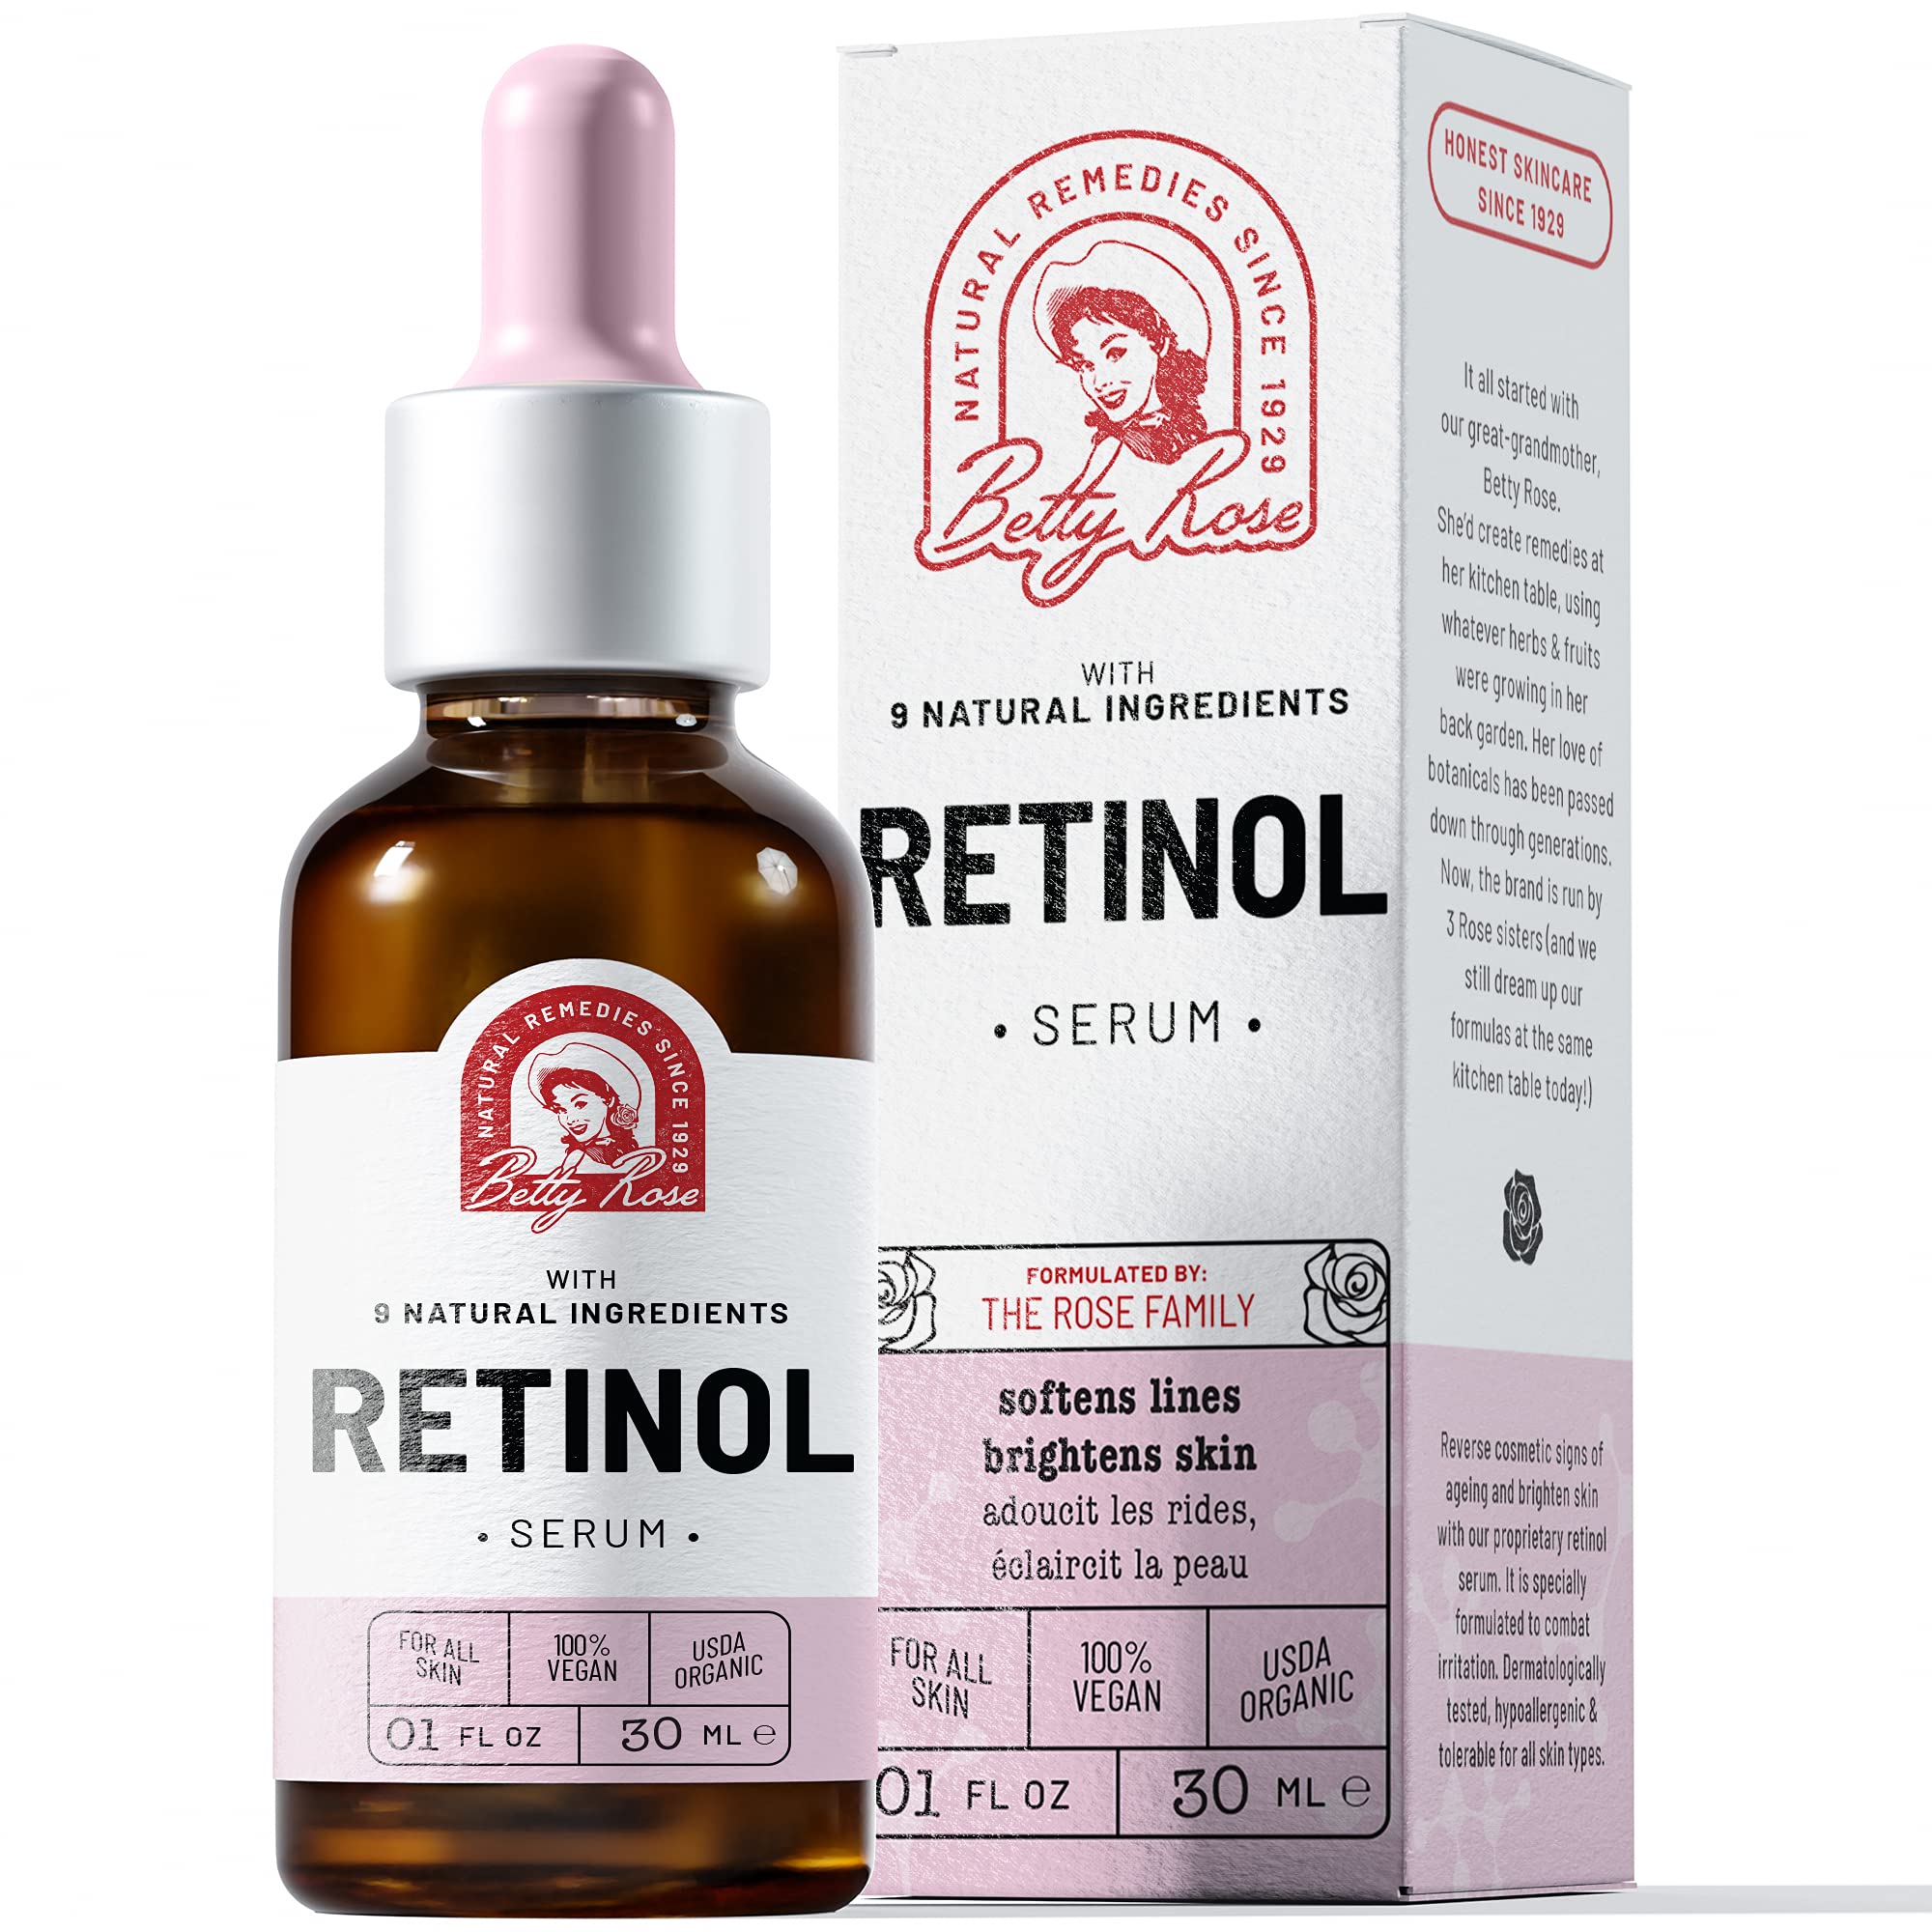 Pure Retinol Serum with 2.5% Plant Based Retinol - Anti Aging, Smoothing, Firming, Plumping - Infused with Vitamin E, Hyaluronic Acid, Aloe Vera - Made in the UK